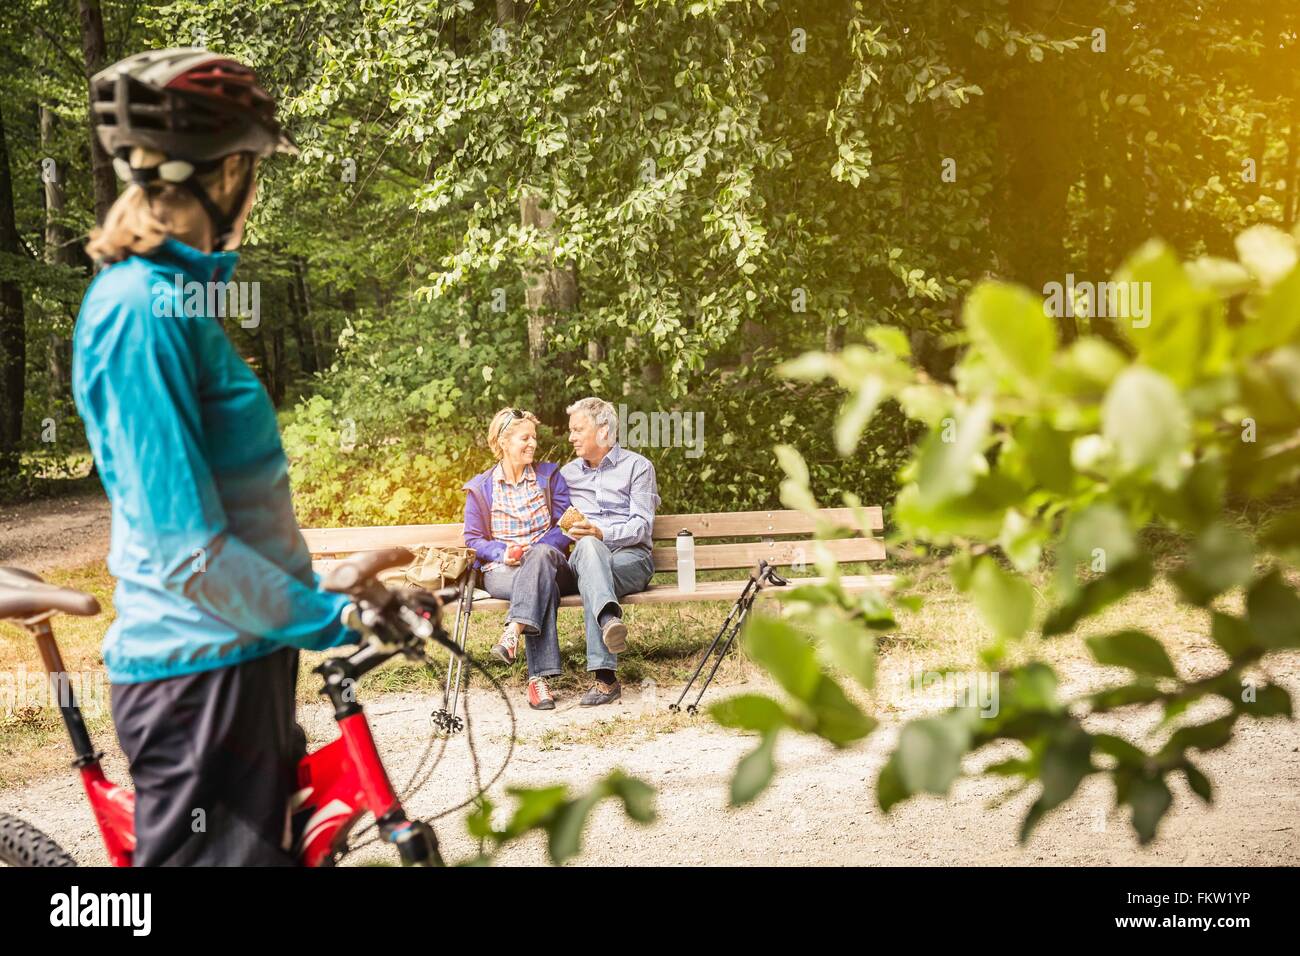 Female mountain biker watching happy couple on park bench Stock Photo